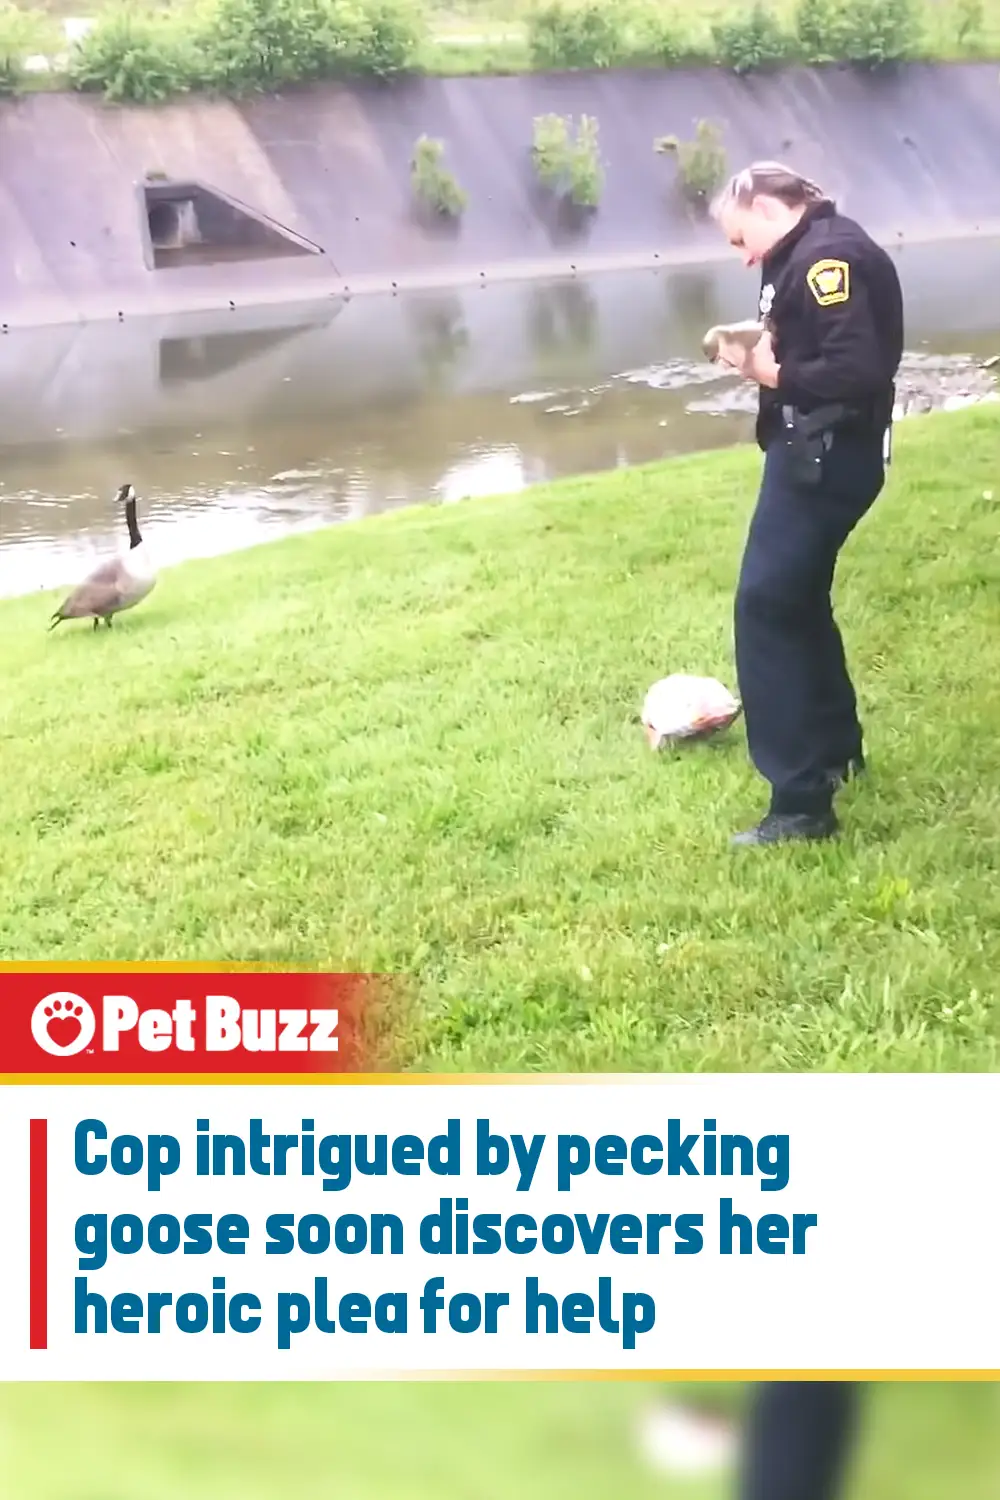 Cop intrigued by pecking goose soon discovers her heroic plea for help